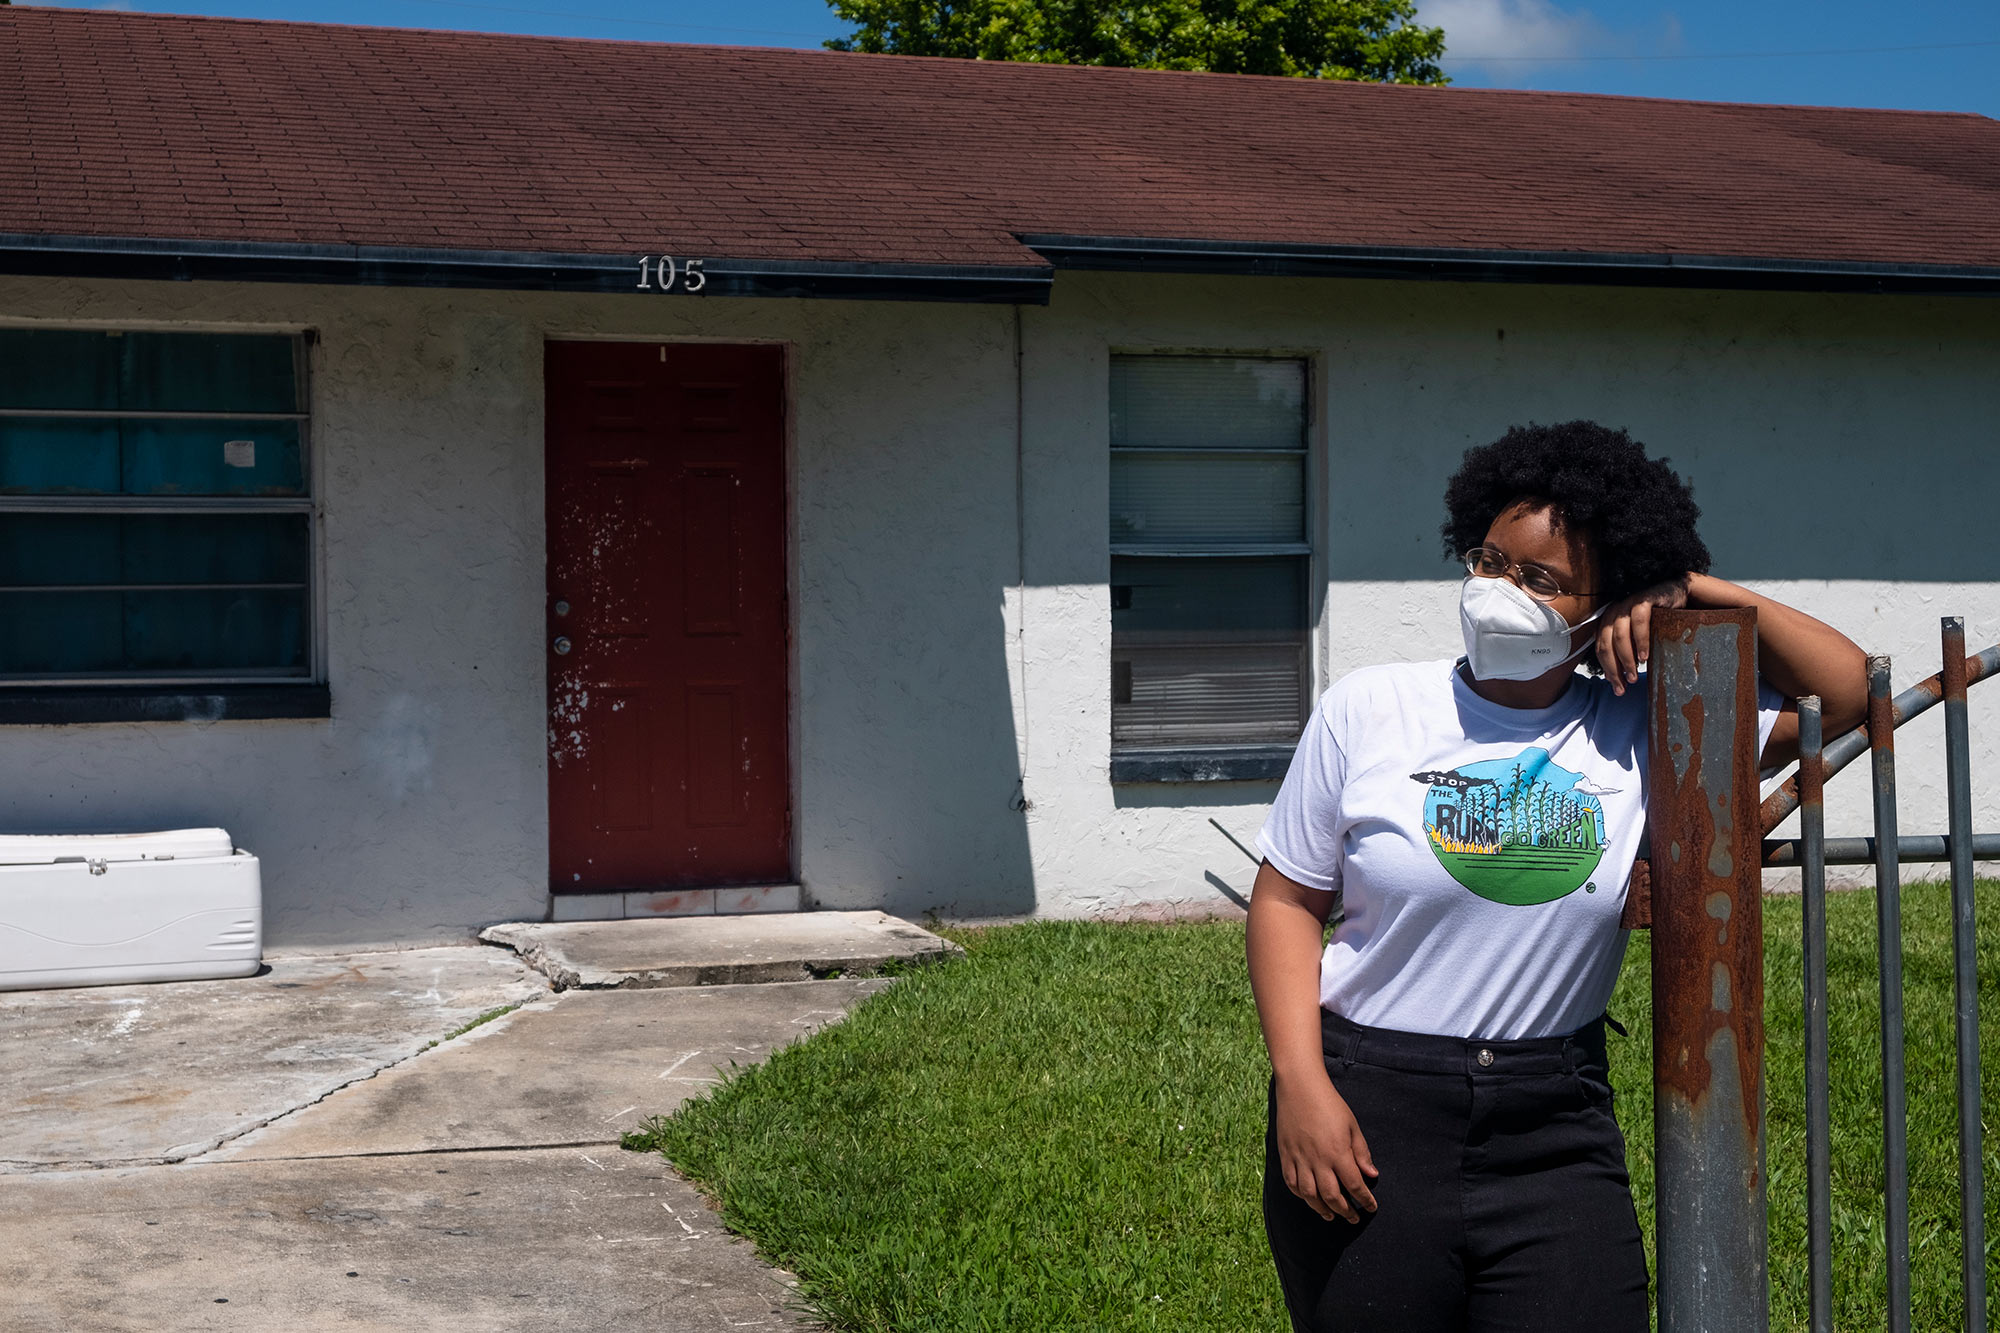 Kil’mari Phillips stands outside her home in South Bay, Florida — a few hundred feet away from Rosenwald Elementary School and the acres of sugarcane adjacent to it.